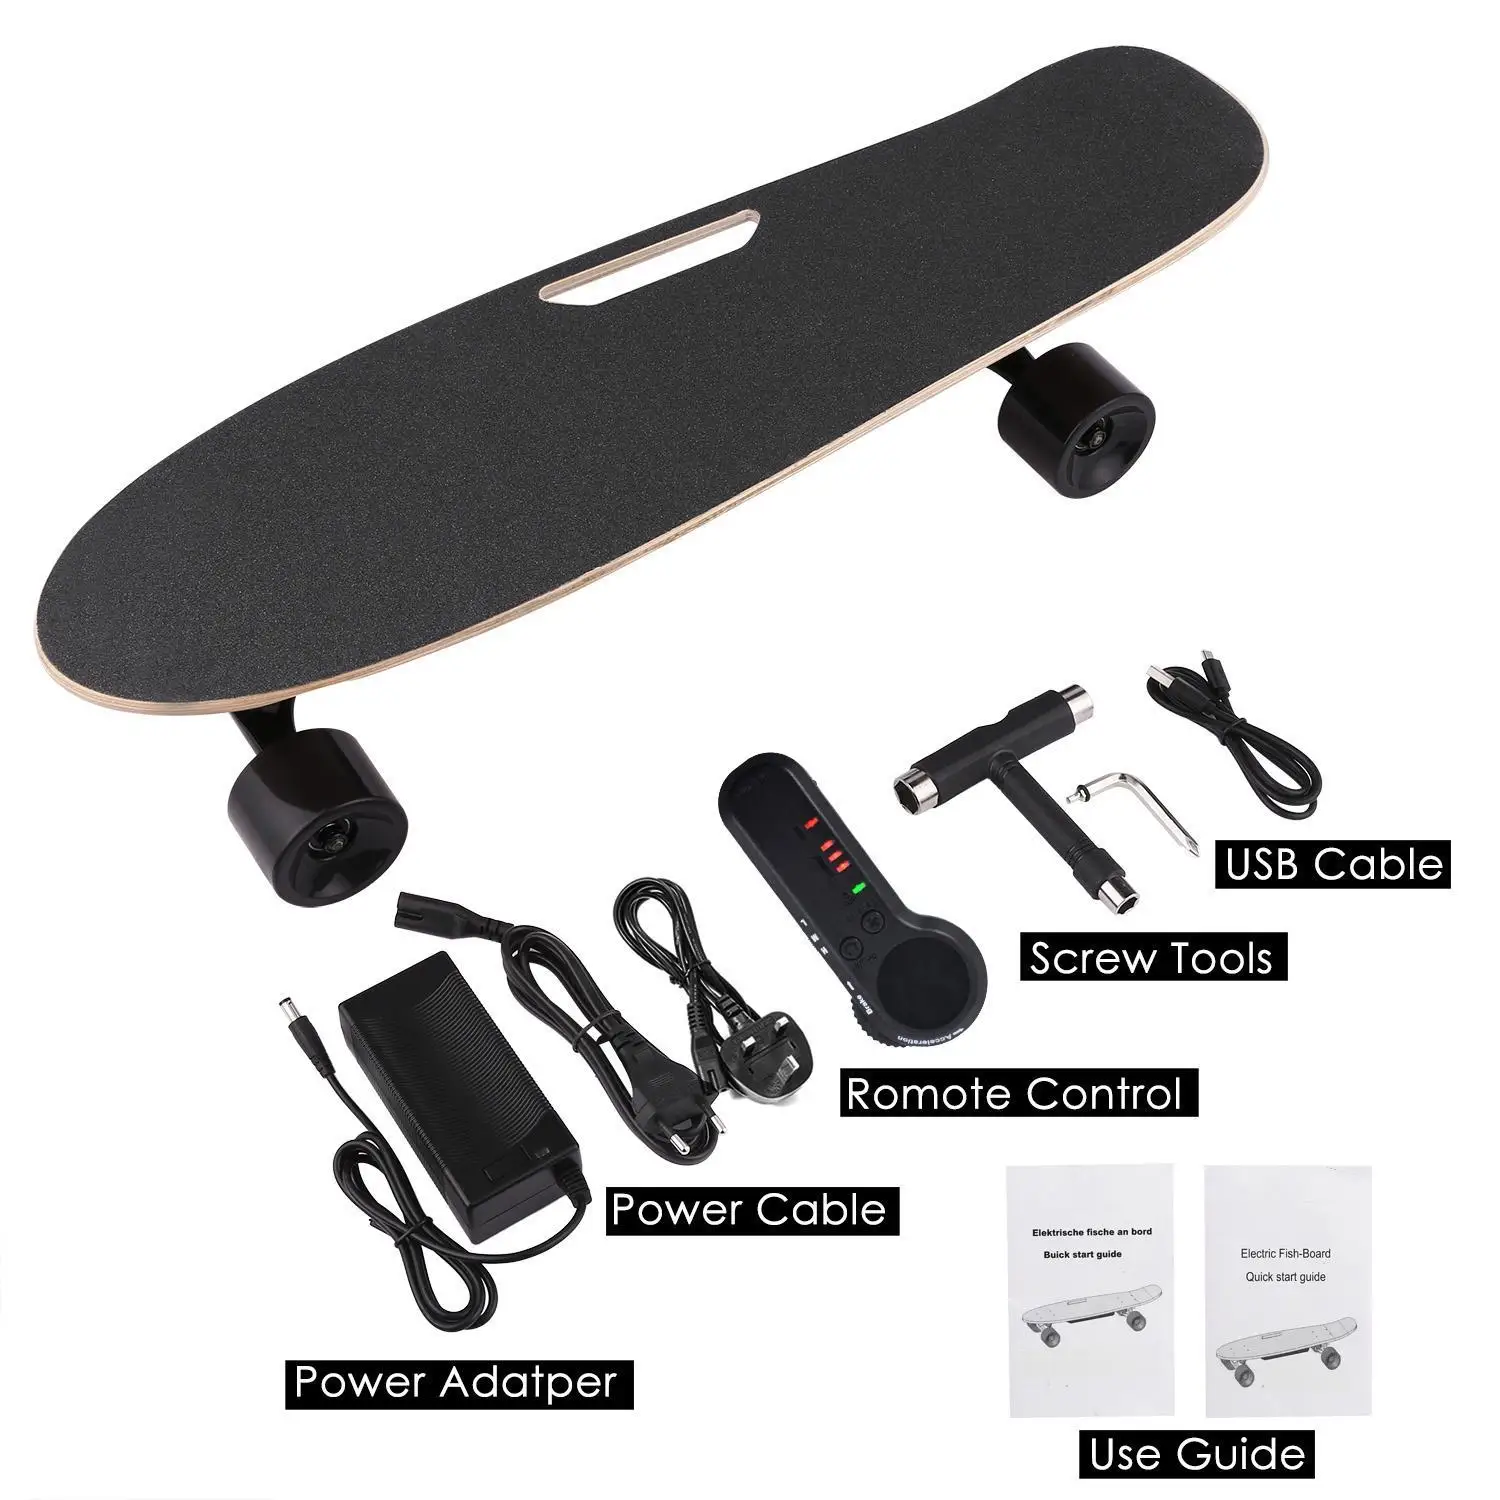 Aceshin Electric Skateboard Handheld Control Remote Portable with Wireless 